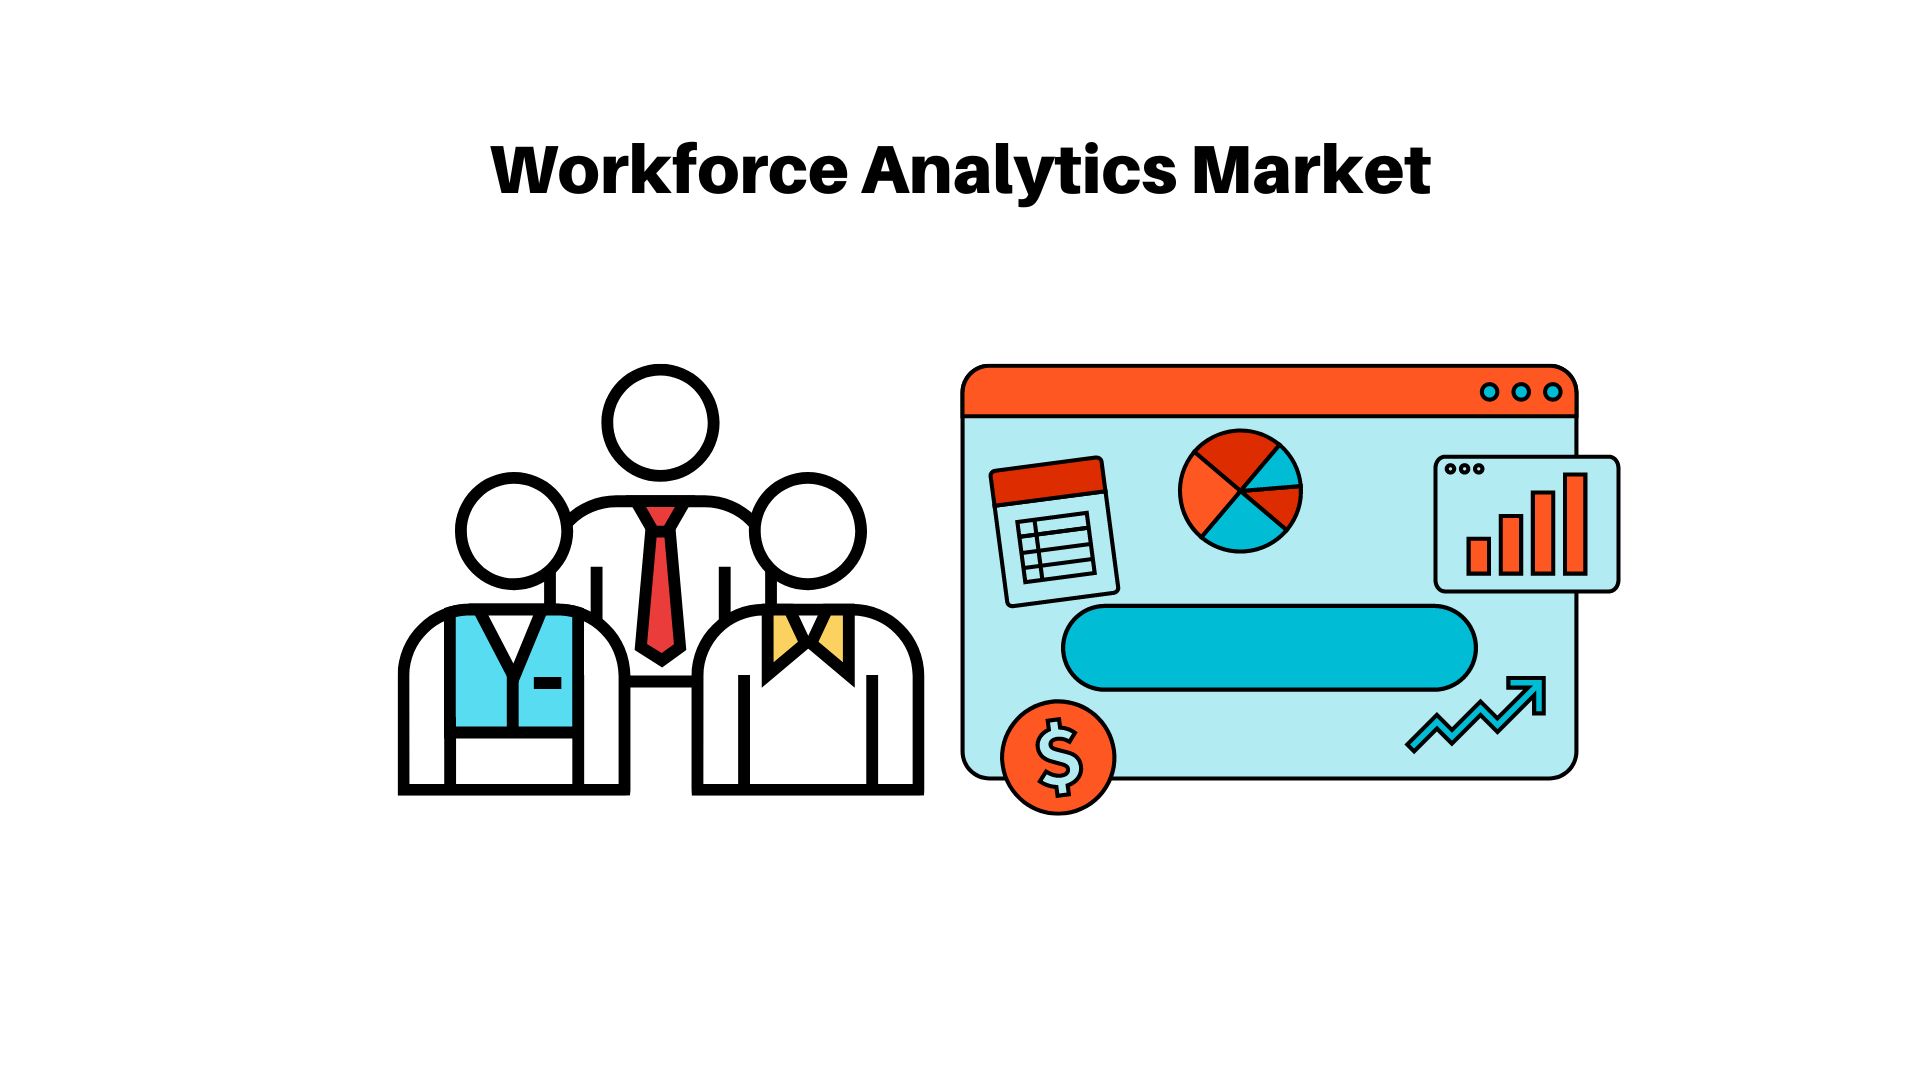 Workforce Analytics Market size is expected to reach USD 11.47 Bn by 2033 | CAGR of 17.6%